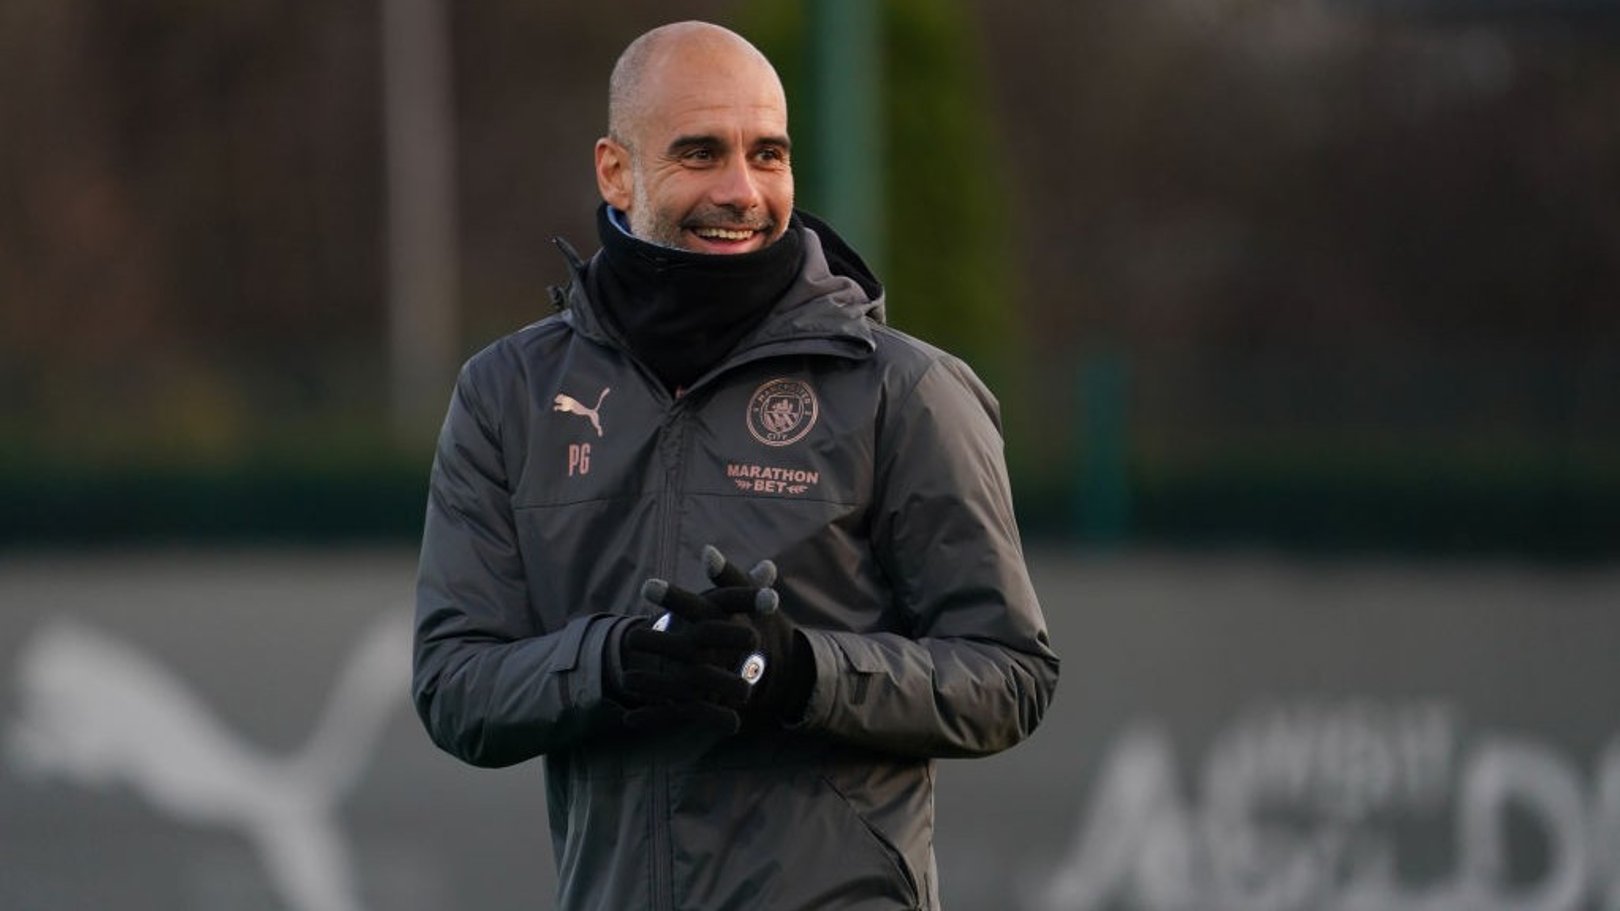 Playing for a place in a Champions League final a privilege, says Guardiola